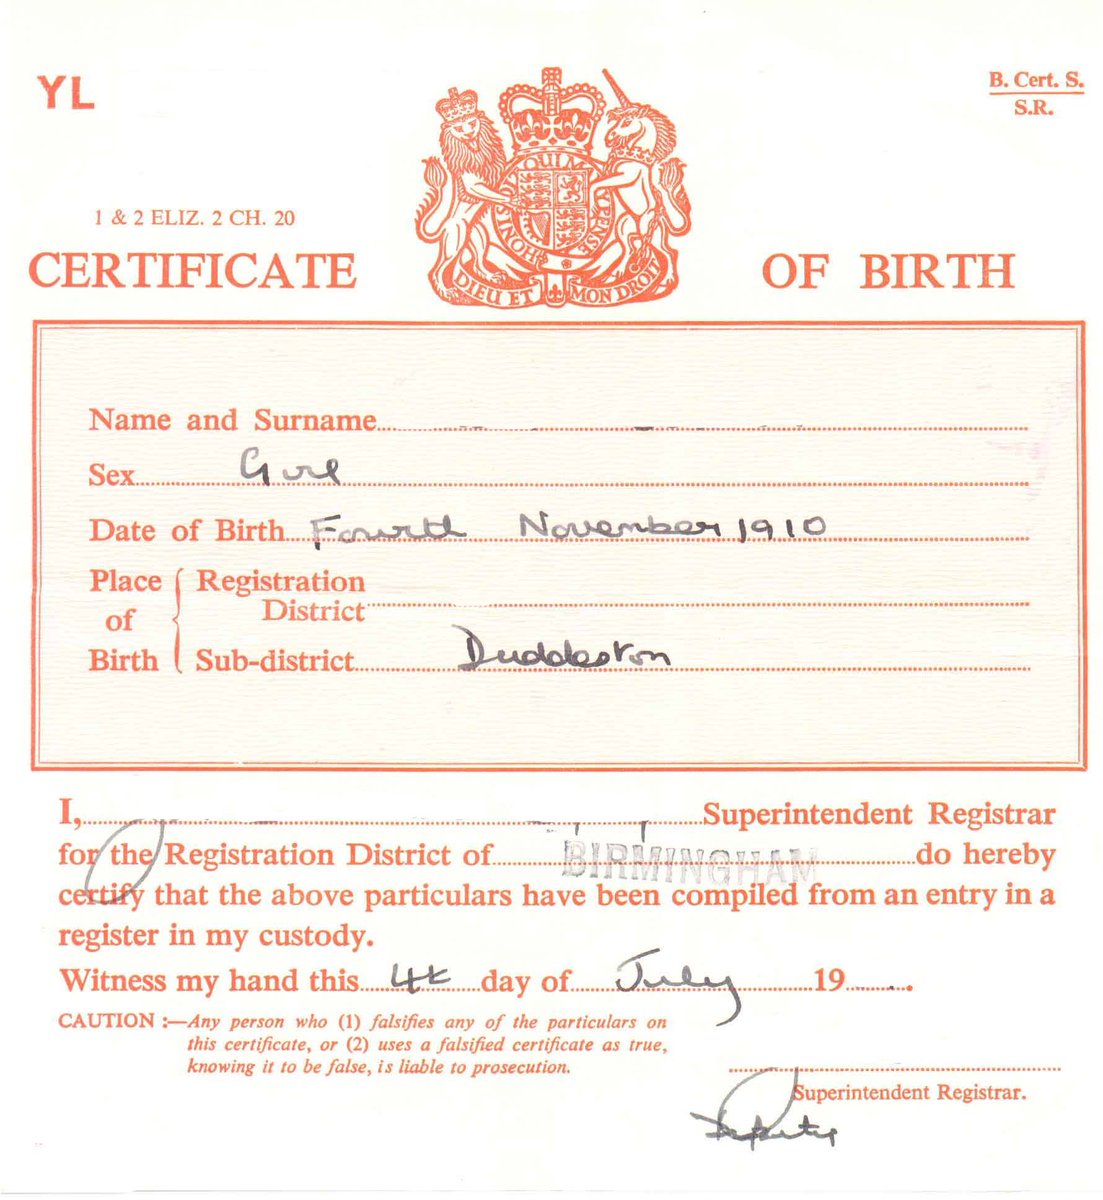 What you are reduced down to via your birthing certificate is a 3 word name, all caps, registered, confirmed, asked by a number which is confirmed on your birthing certificate and there you exist to the powers that be...